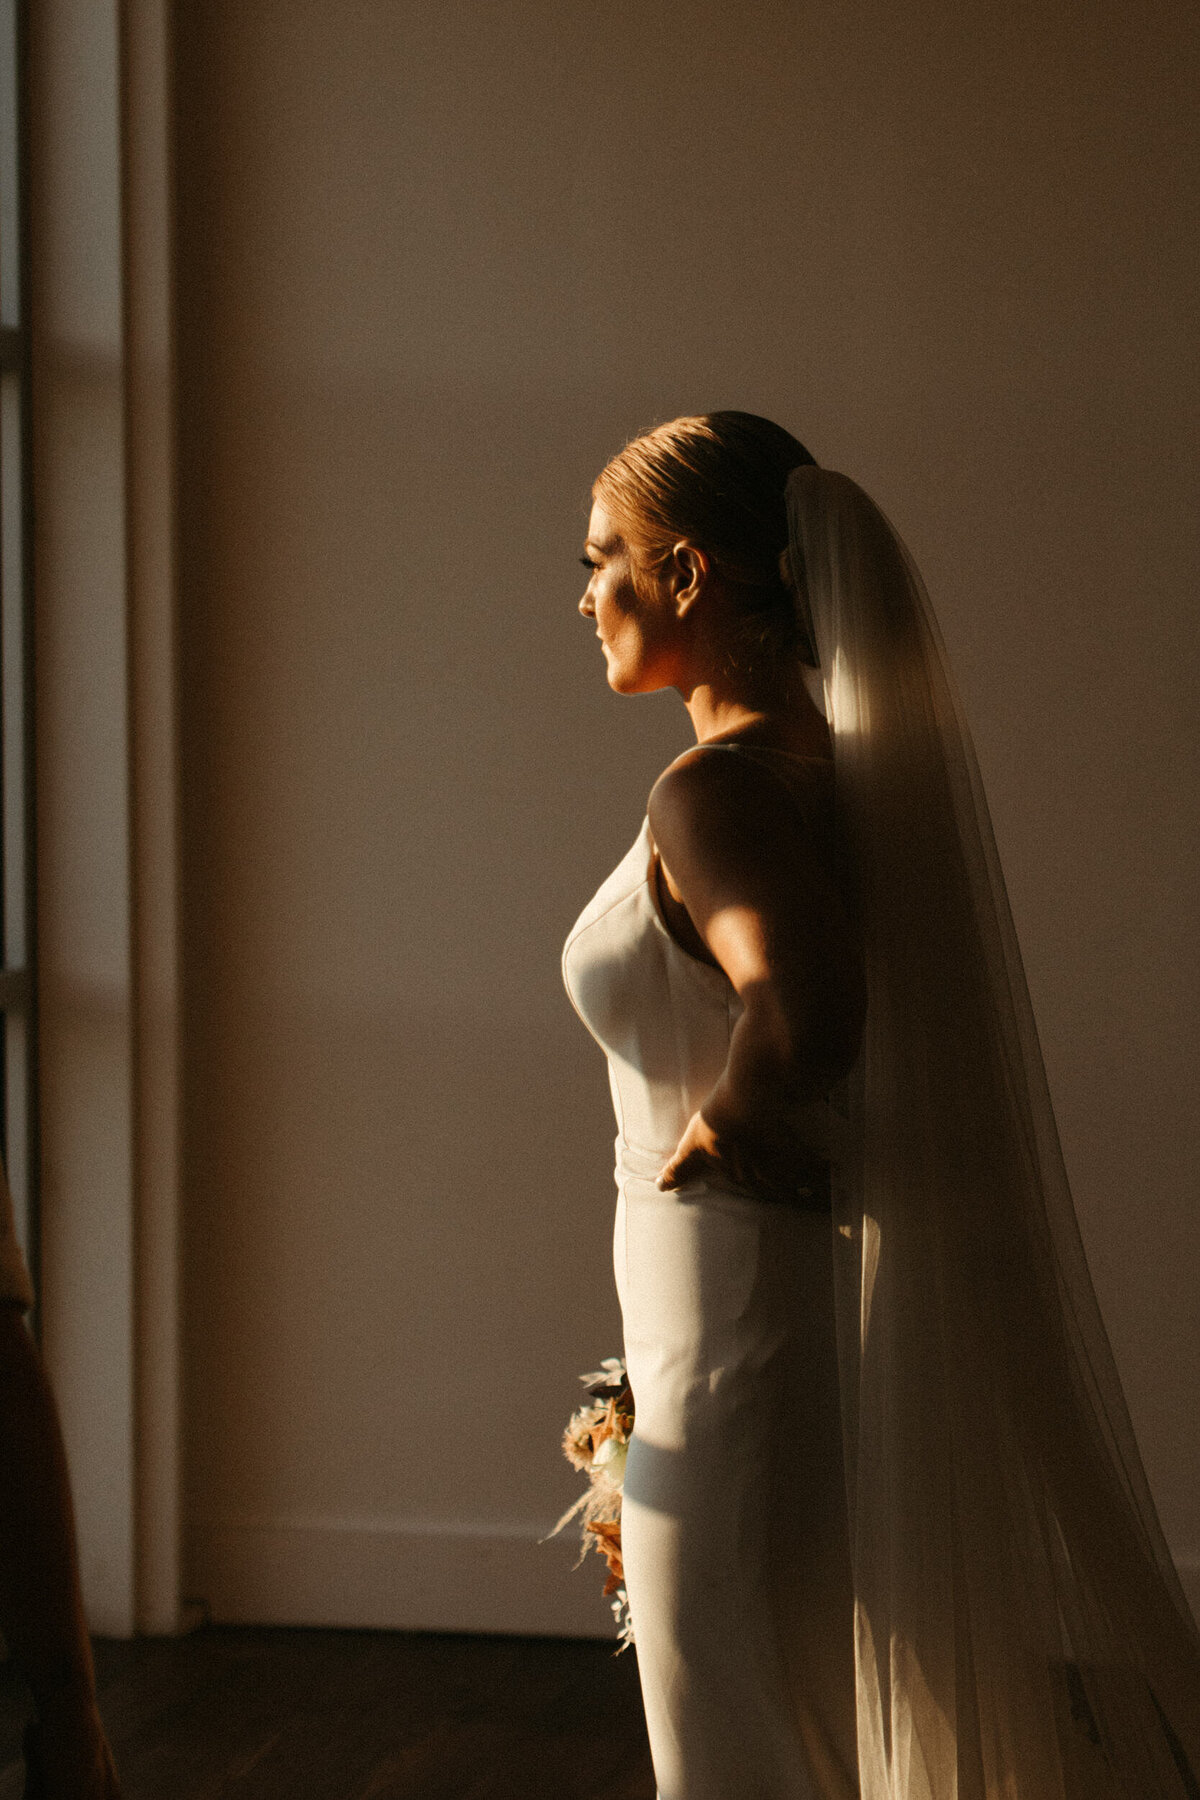 Modern bride in sheath dress and cathedral veil gazing out the window during sunset on her wedding day